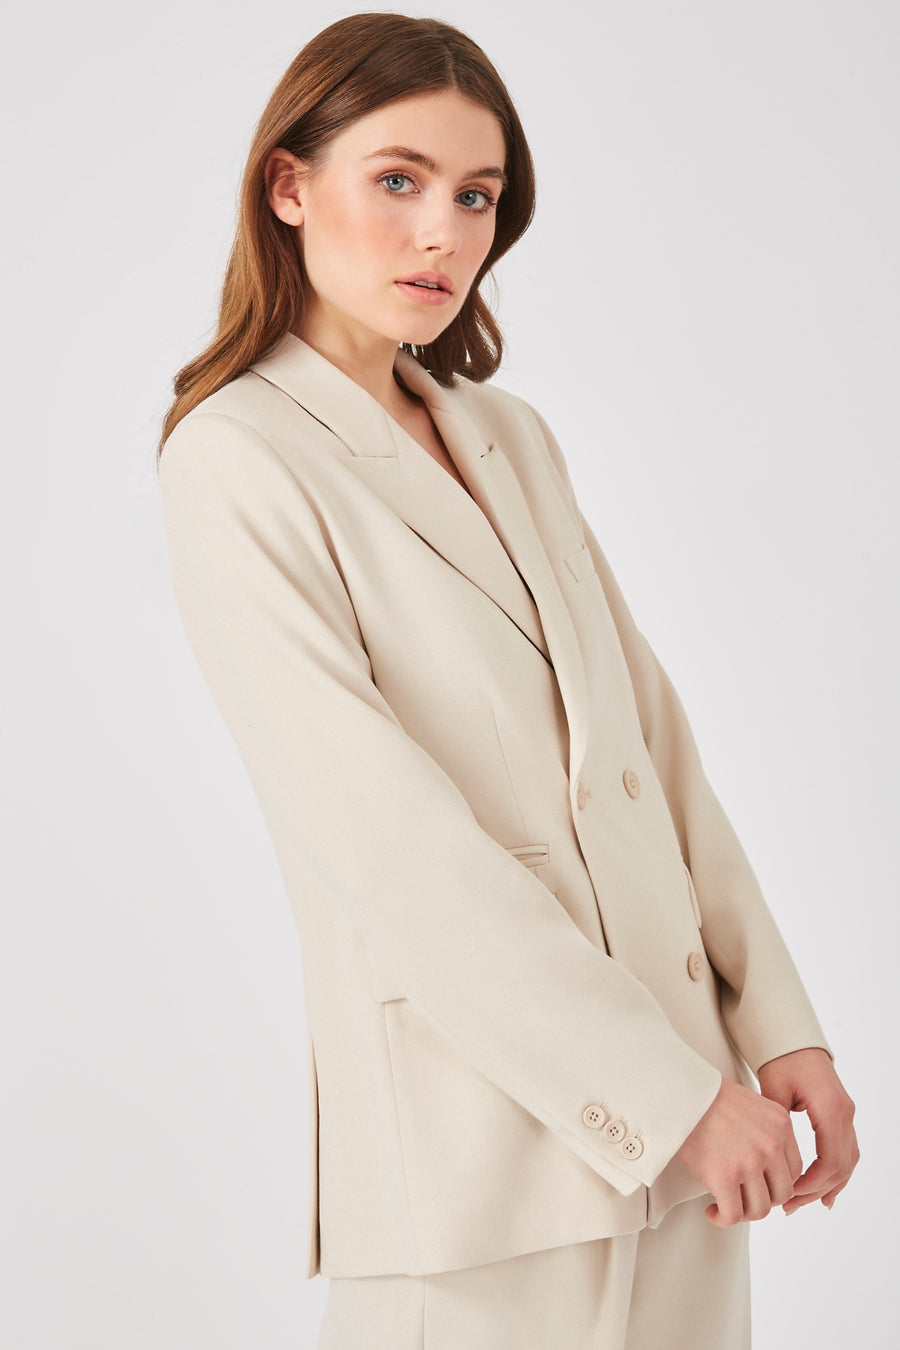 THE MULBERRY DOUBLE BREASTED BLAZER - NATURAL